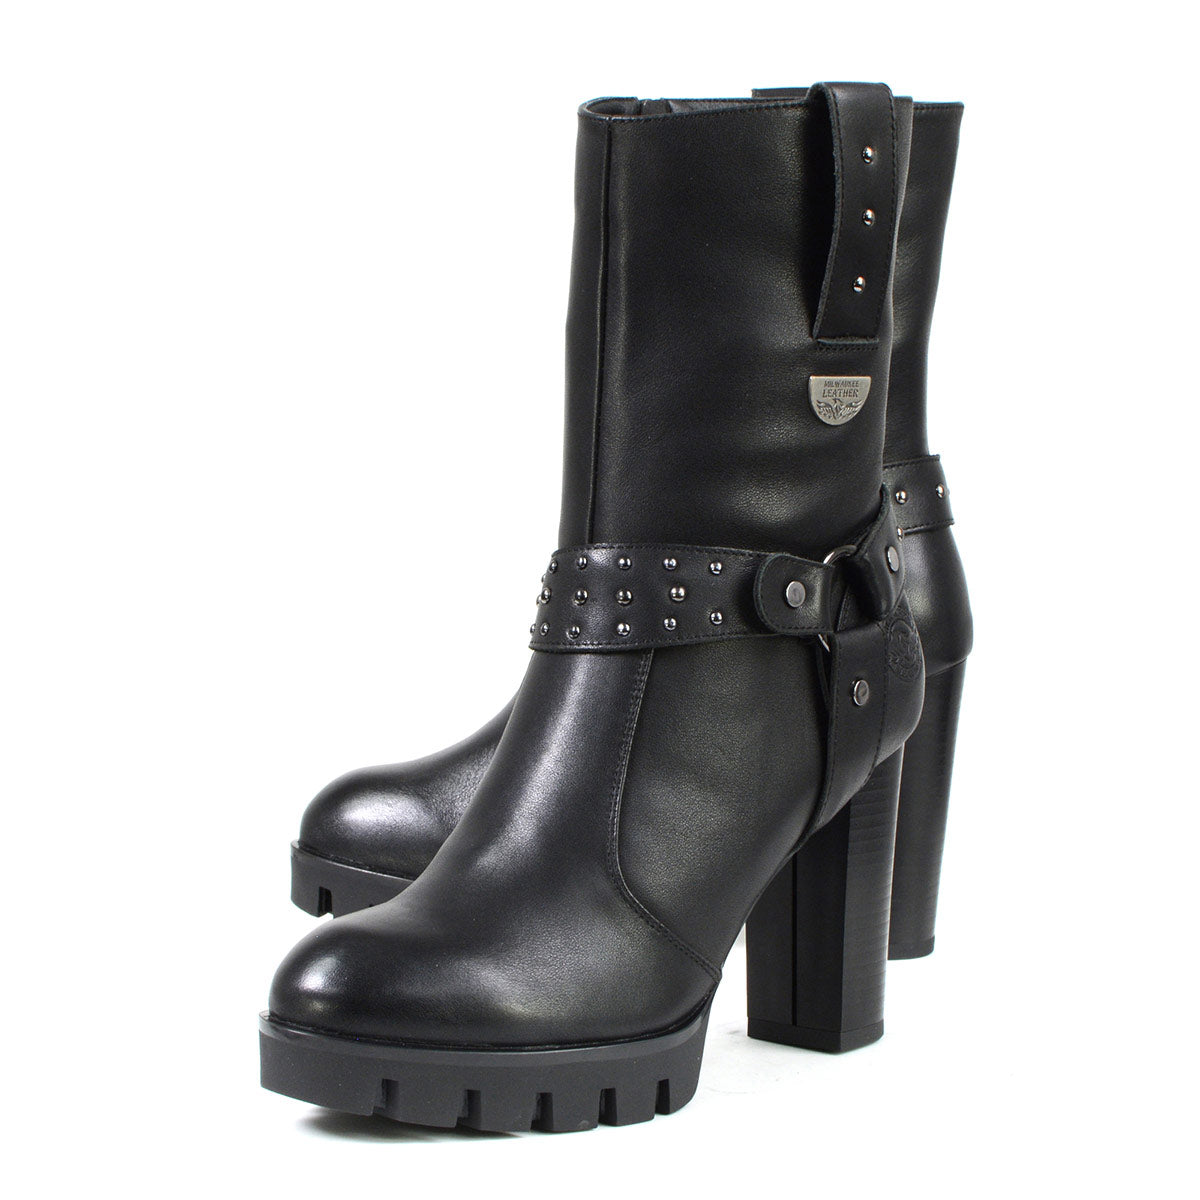 Milwaukee Leather MBL9303 Women's Black Leather Harness Boots with Block Heel